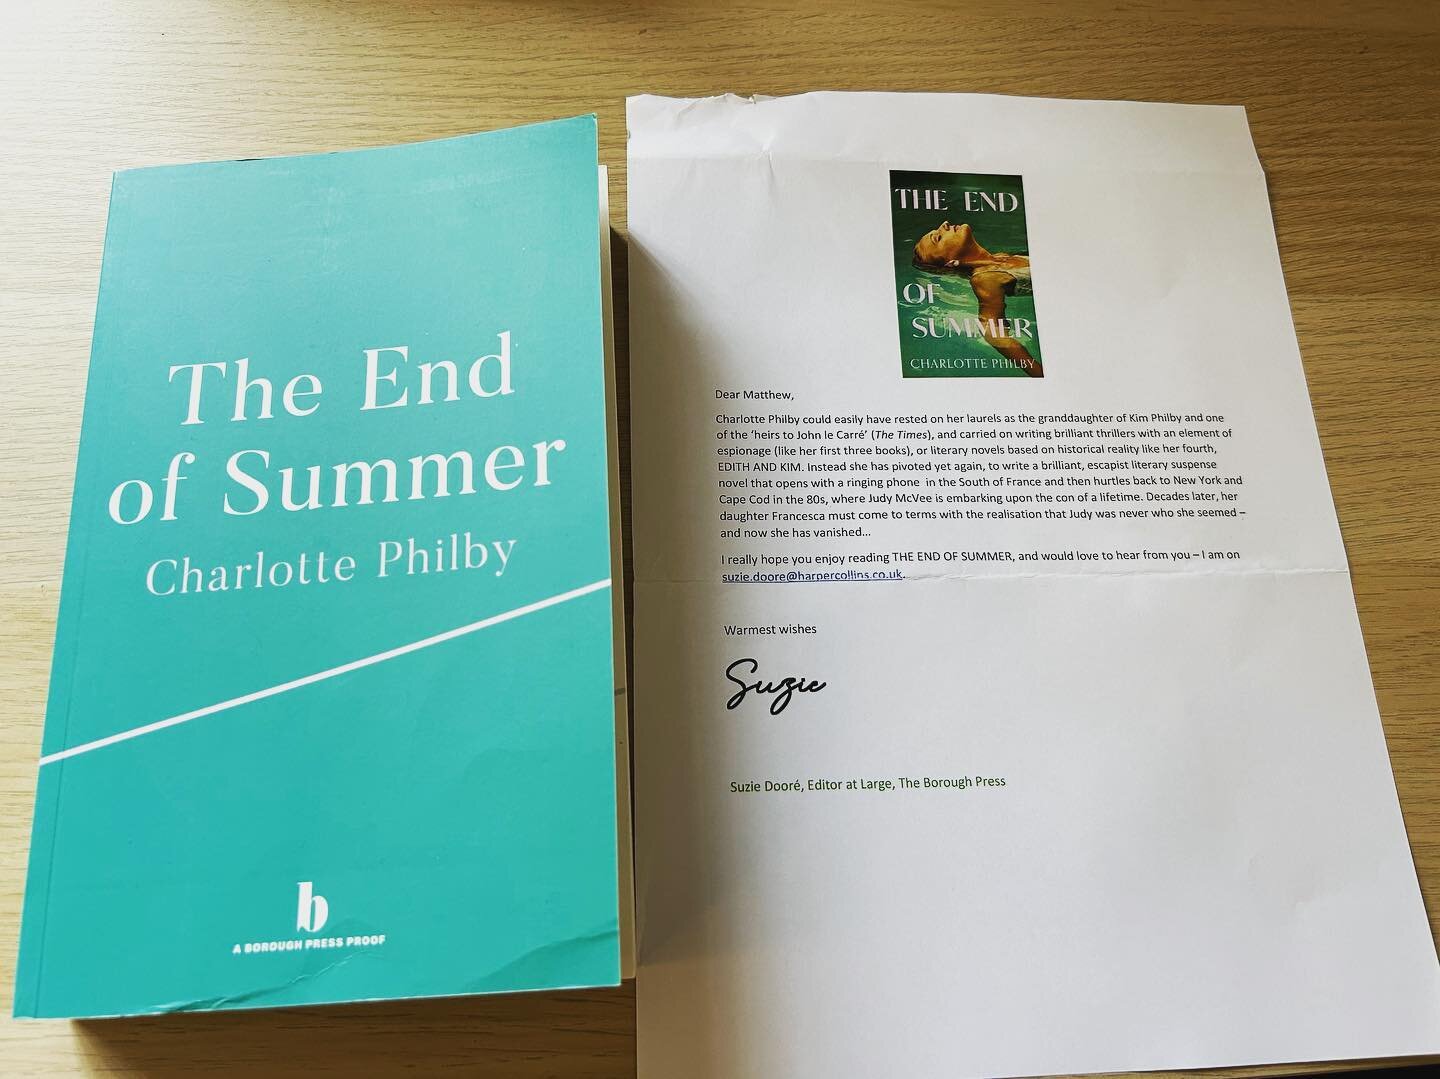 Fabulous #bookpost this morning! Cannot WAIT to read the stunning new novel #TheEndofSummer by @charlotte_philby. Literary suspense at its most sumptuously escapist and spectacular taking in the South of France, New York, London and Cape Cod. Thank y